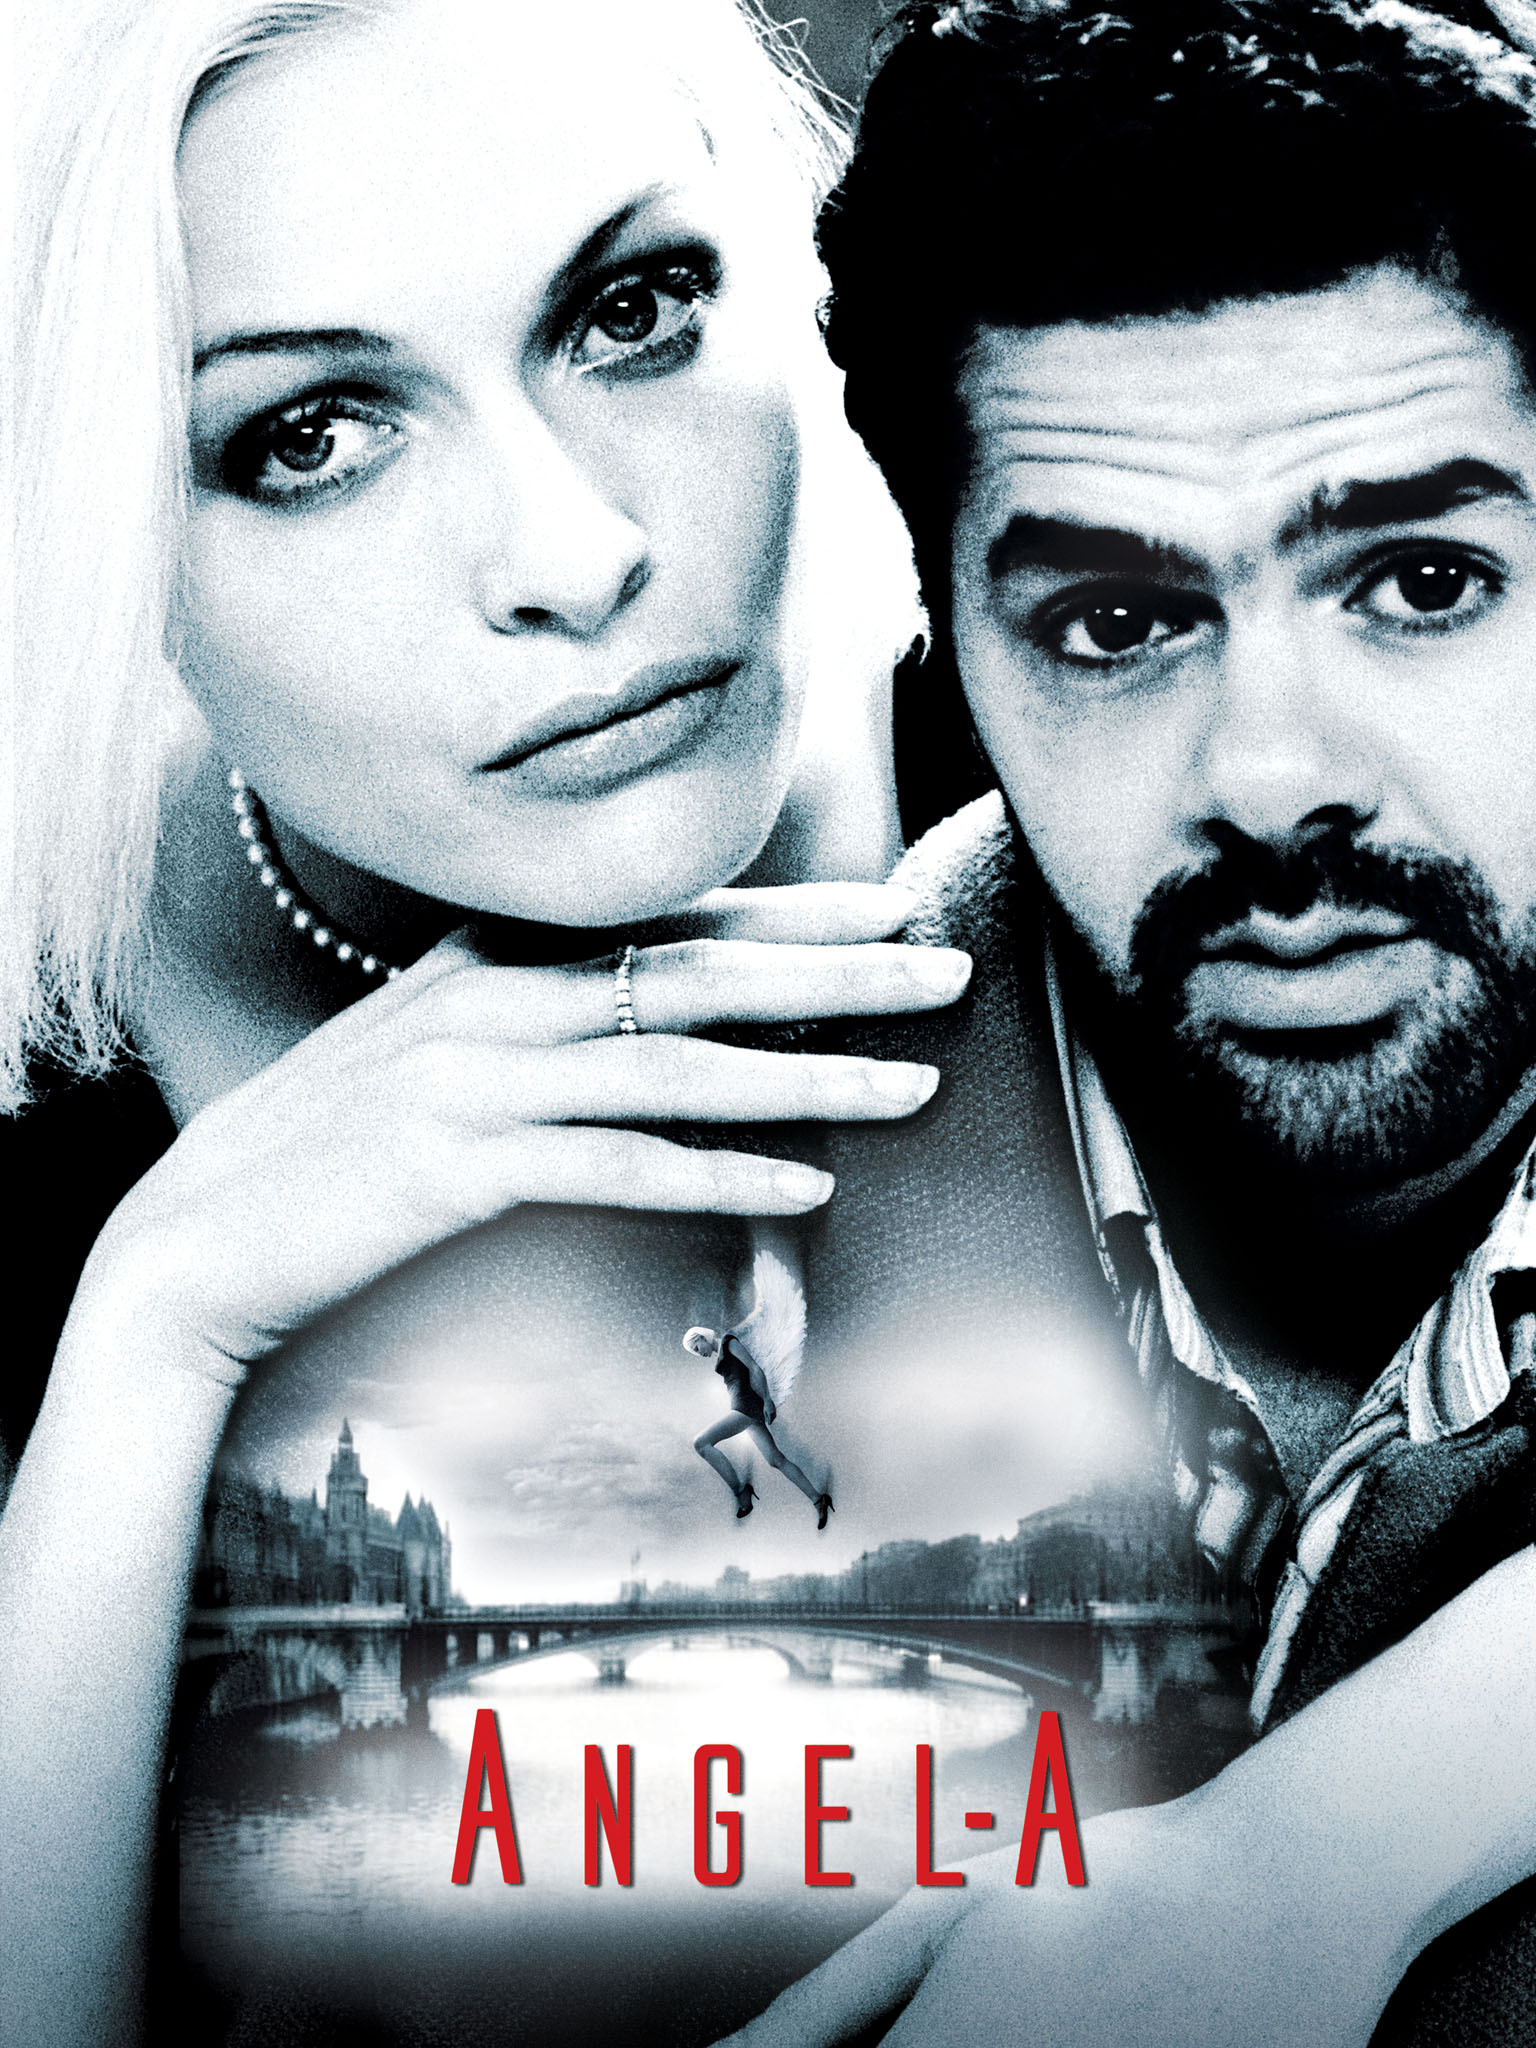 Angel-A movie, Where to watch, Stream online, TV guide, 1540x2050 HD Handy